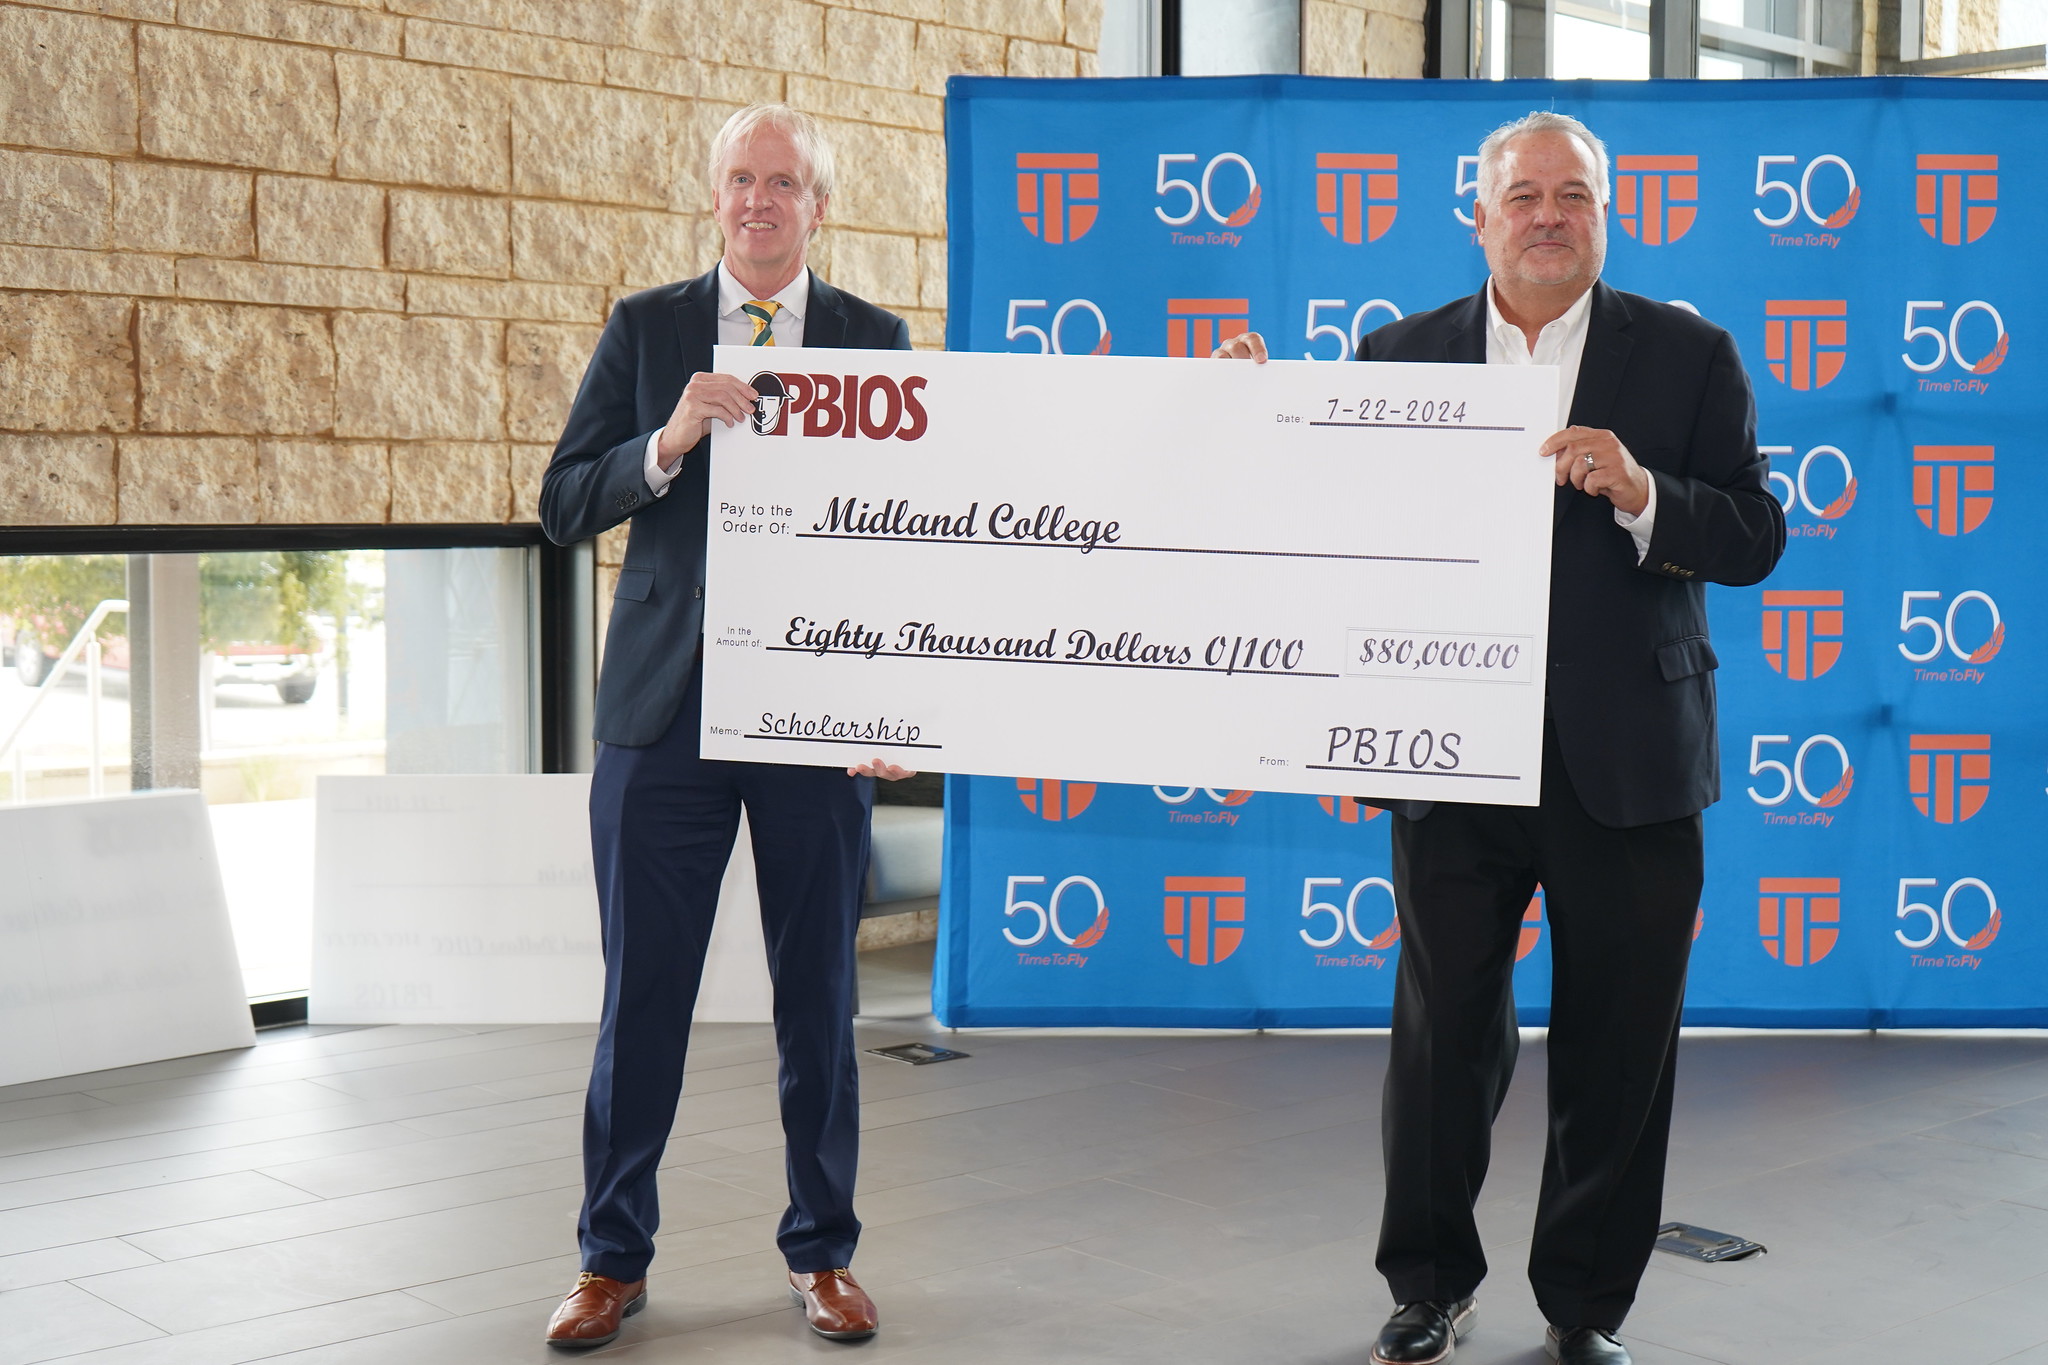 sMC Provost Michael Dixon poses with PBIOS president with donation check